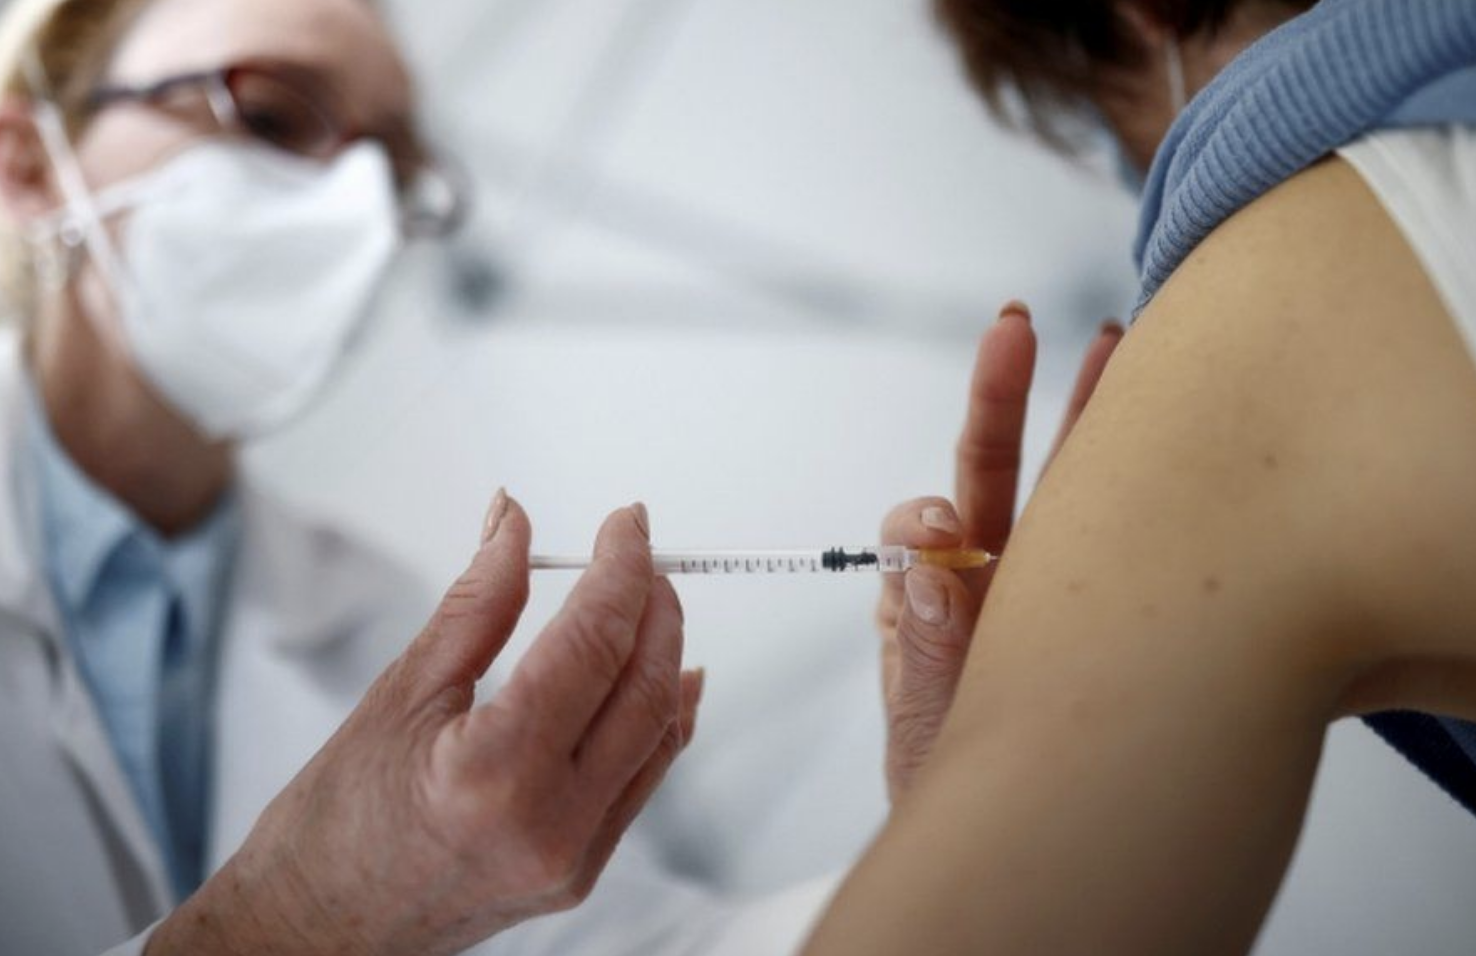 Canada launches its first Vaccine Injury Support Program